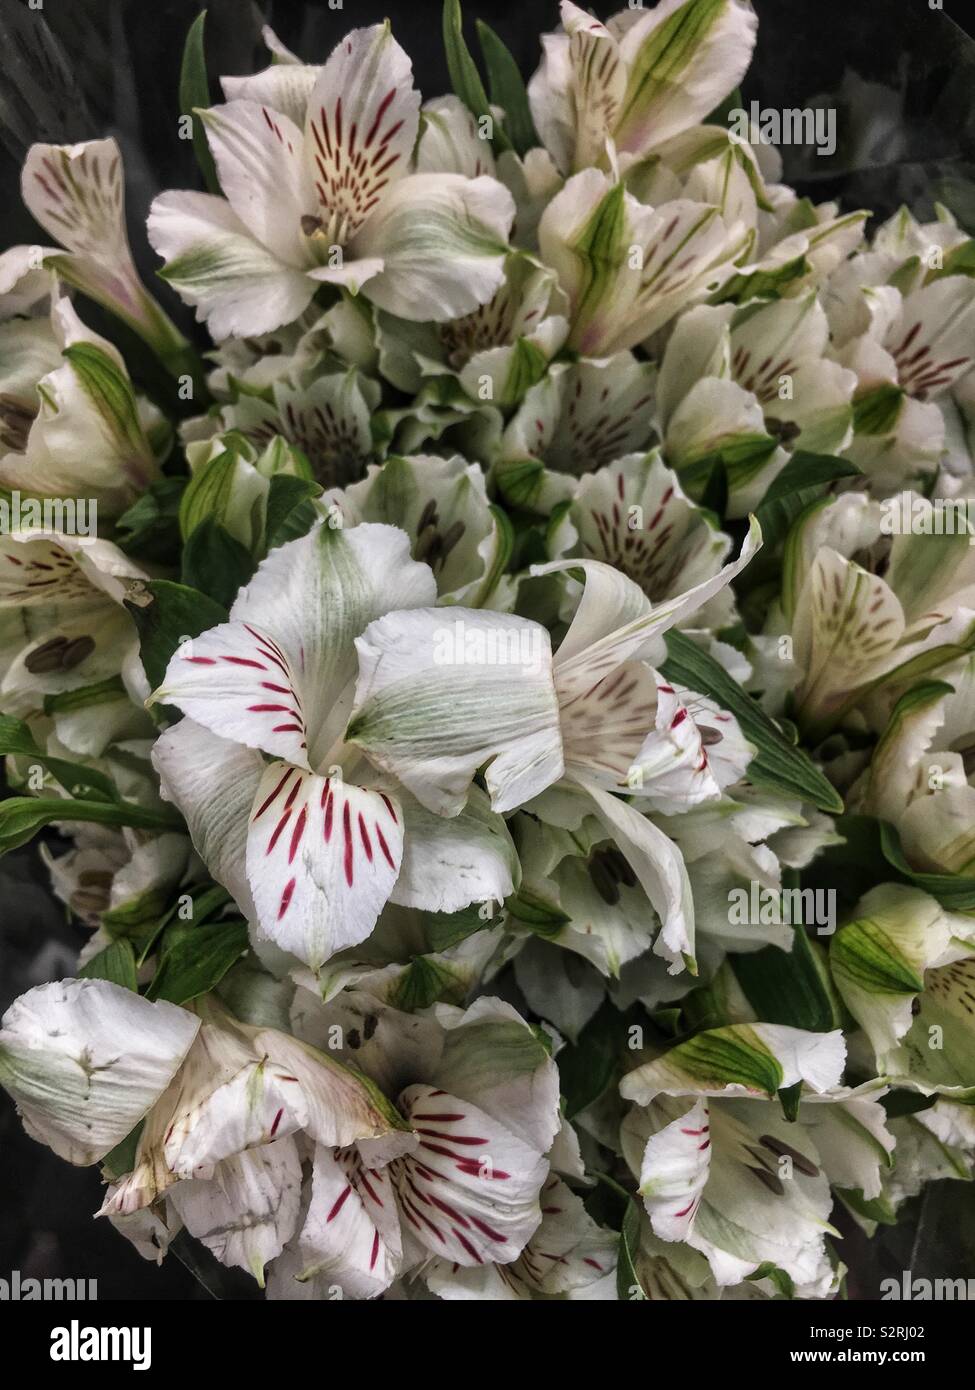 Beautiful bouquet of fresh white crocus flowers with small red stripes. Stock Photo